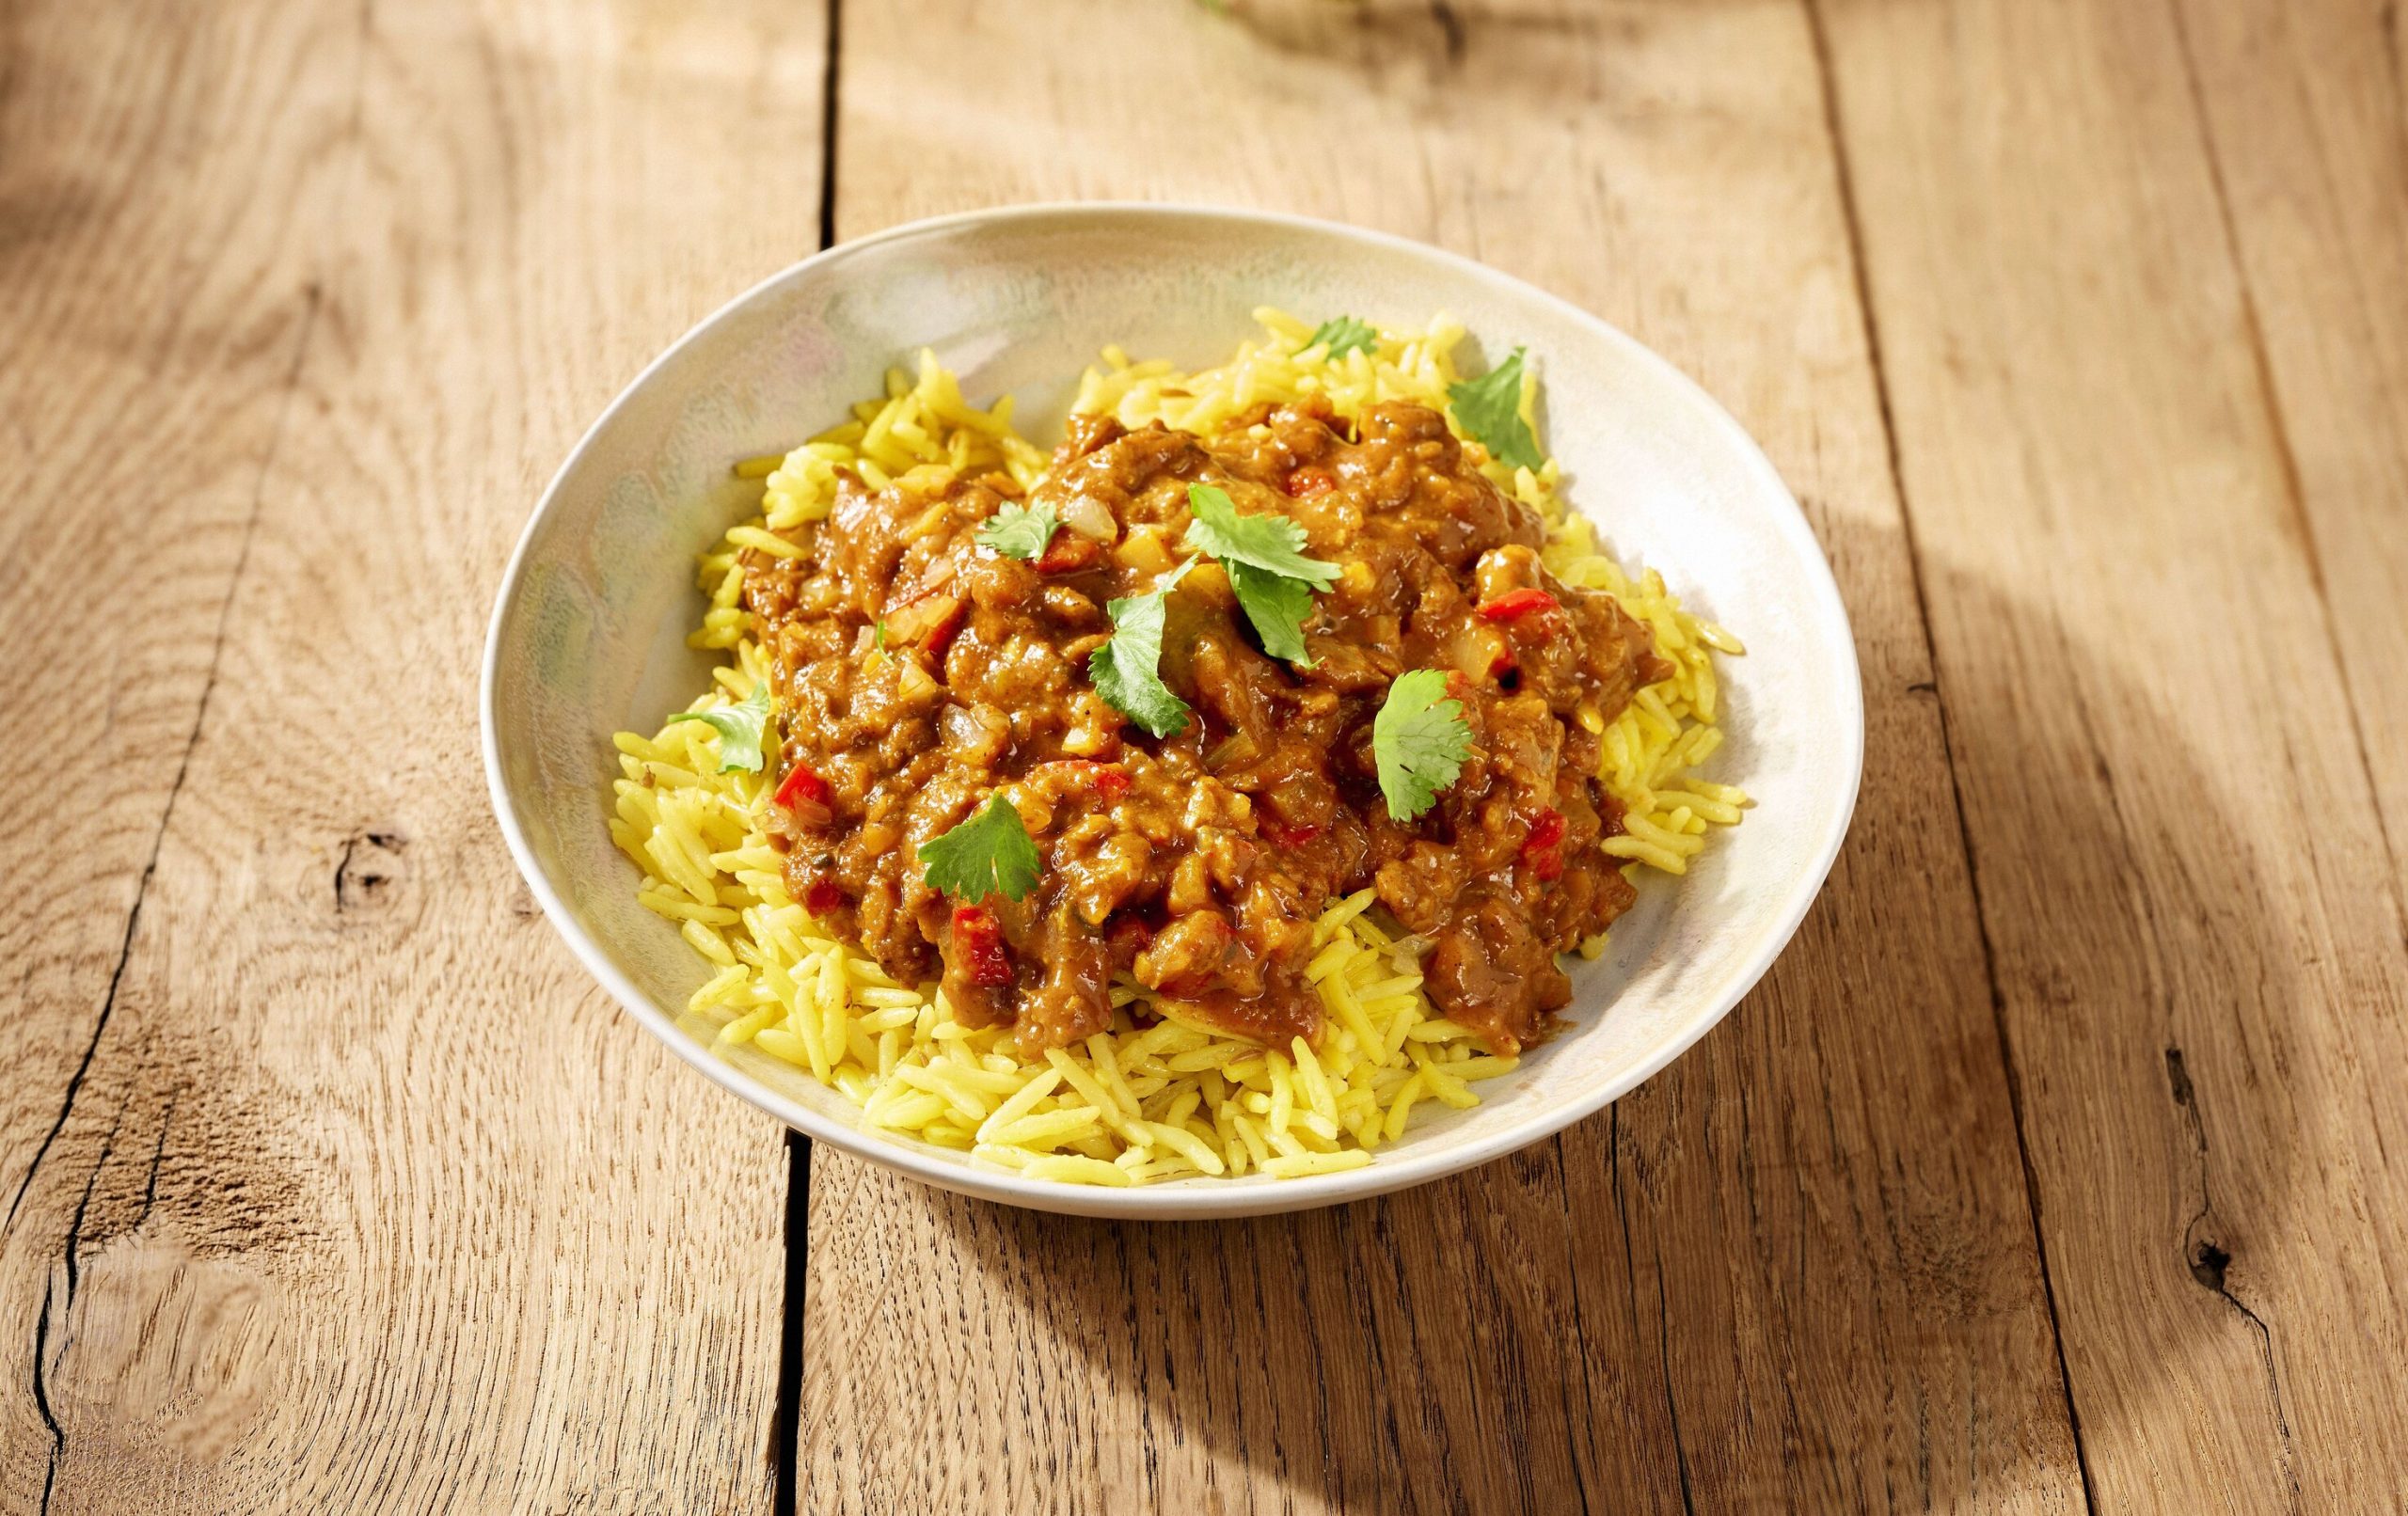 www.znewsservice.com beyond meat launches plant based ready meals range in the uk beyond meals keema curry pilau rice scaled